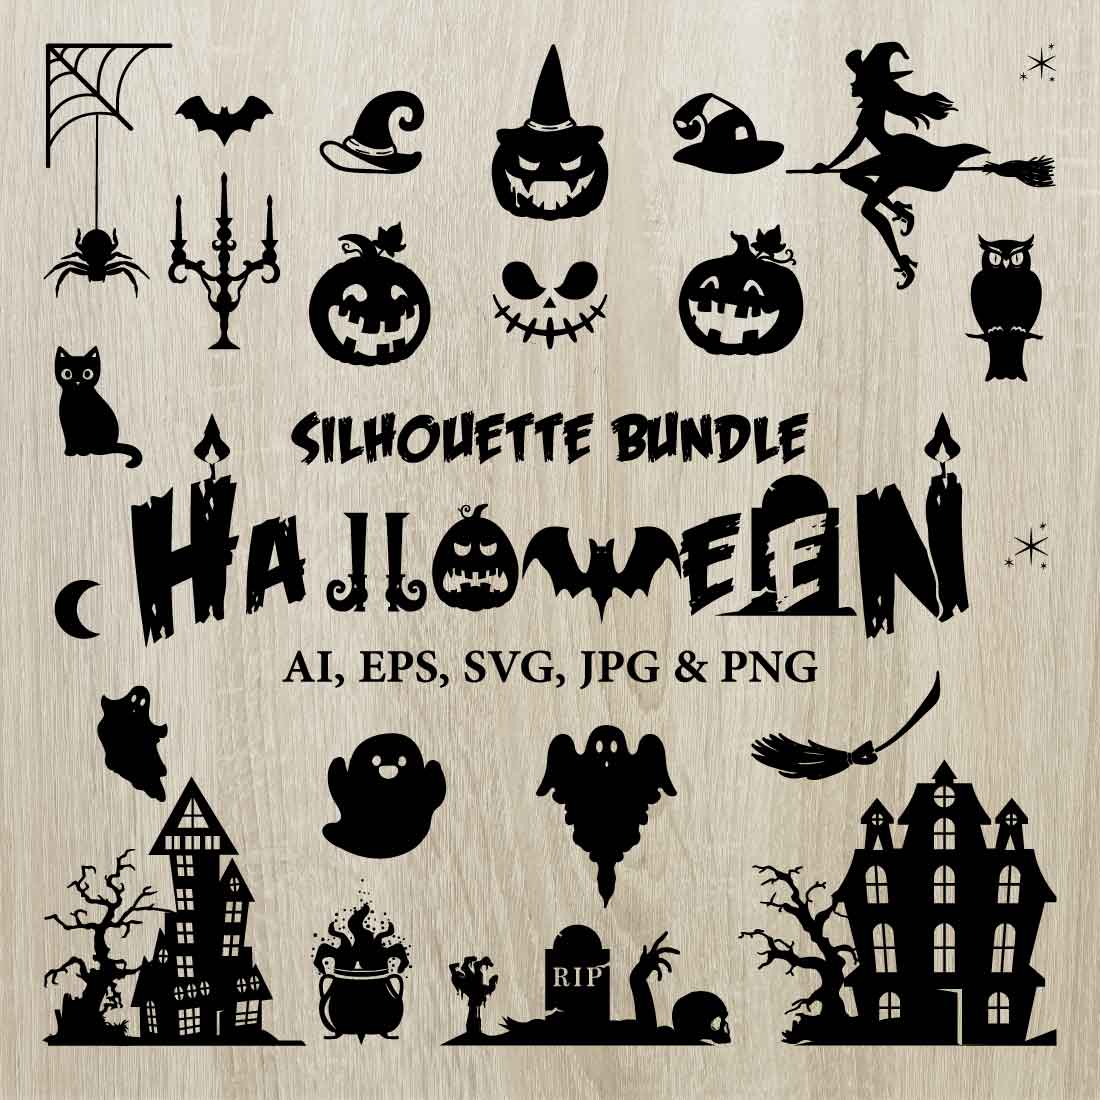 Halloween Silhouette Bundle cover image.